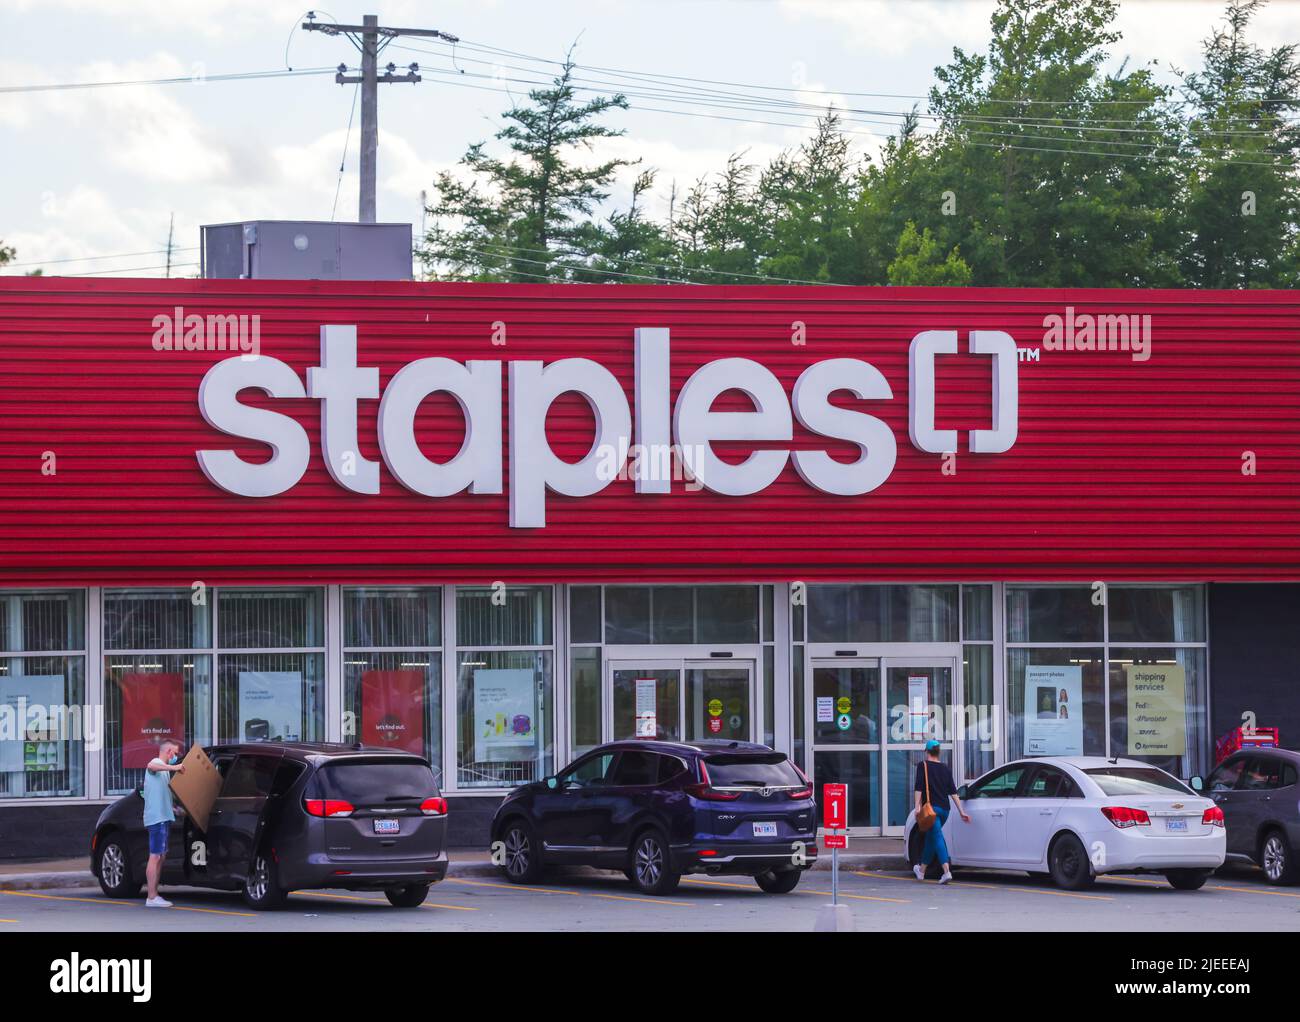 Staples Storefront. Staples is an American retail company specialized in office supplies. HALIFAX, NOVA SCOTIA, CANADA Stock Photo